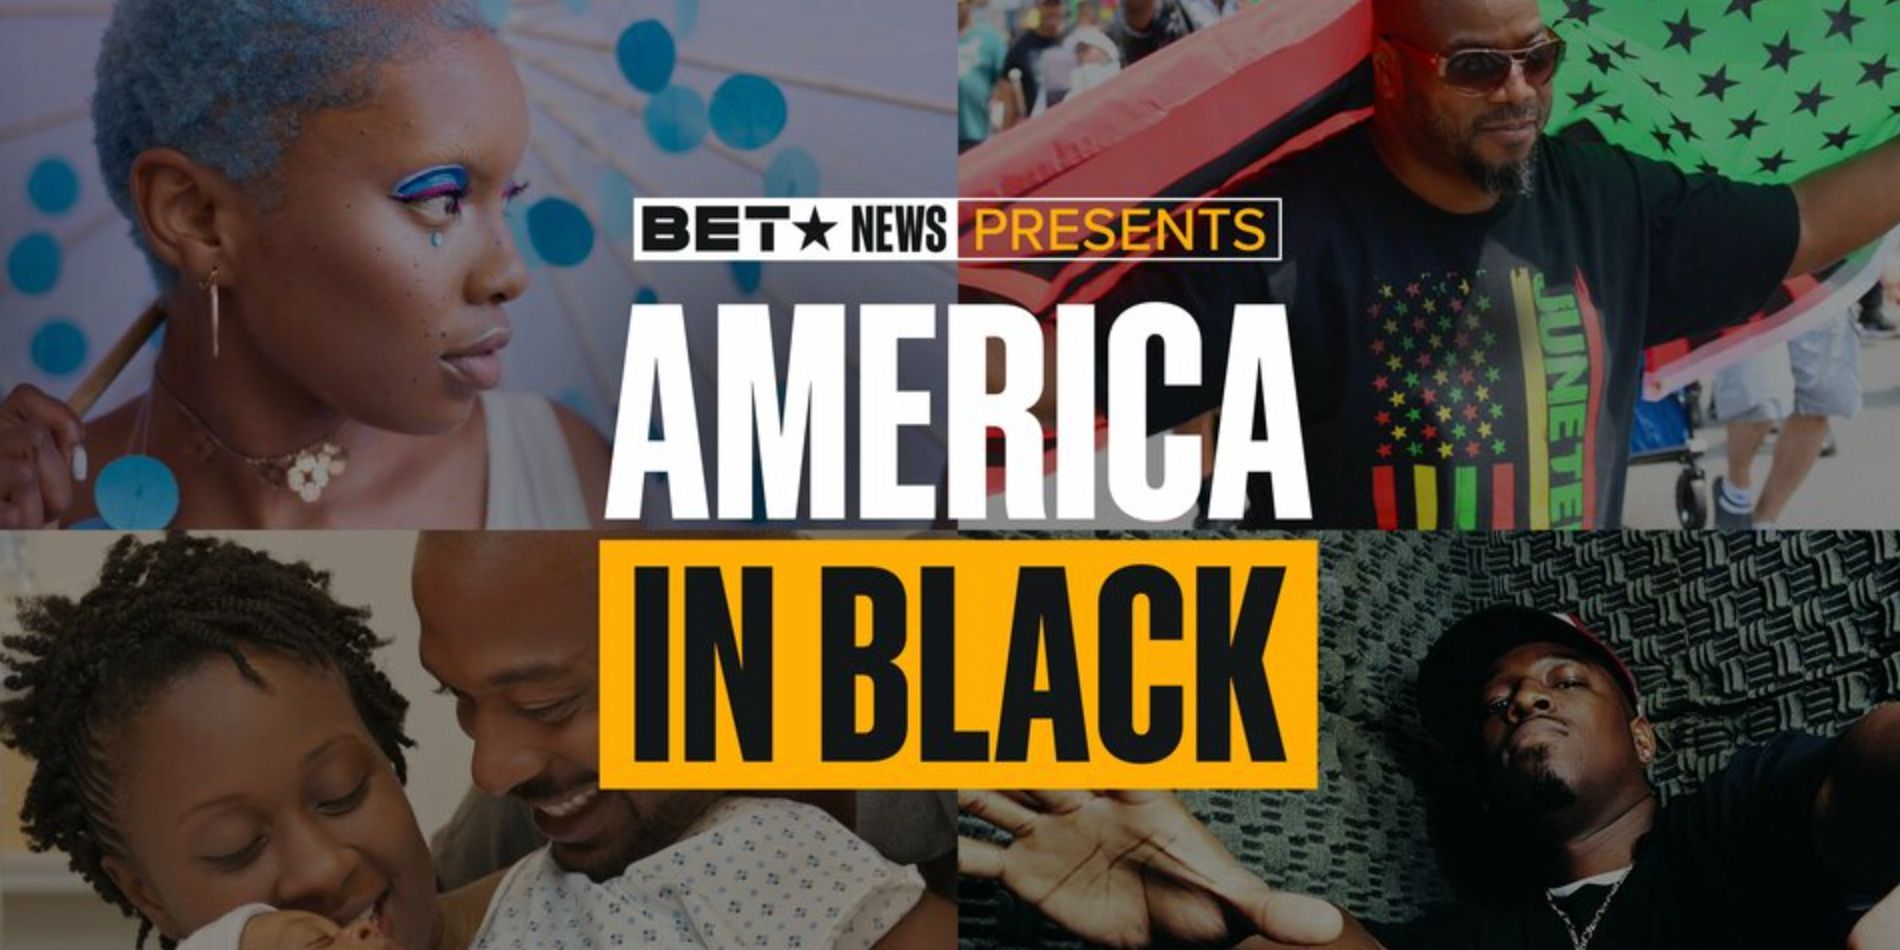 The title card for Black in America on BET features Black individuals under a parasol, under a flag, in a music video, and welcoming a new baby